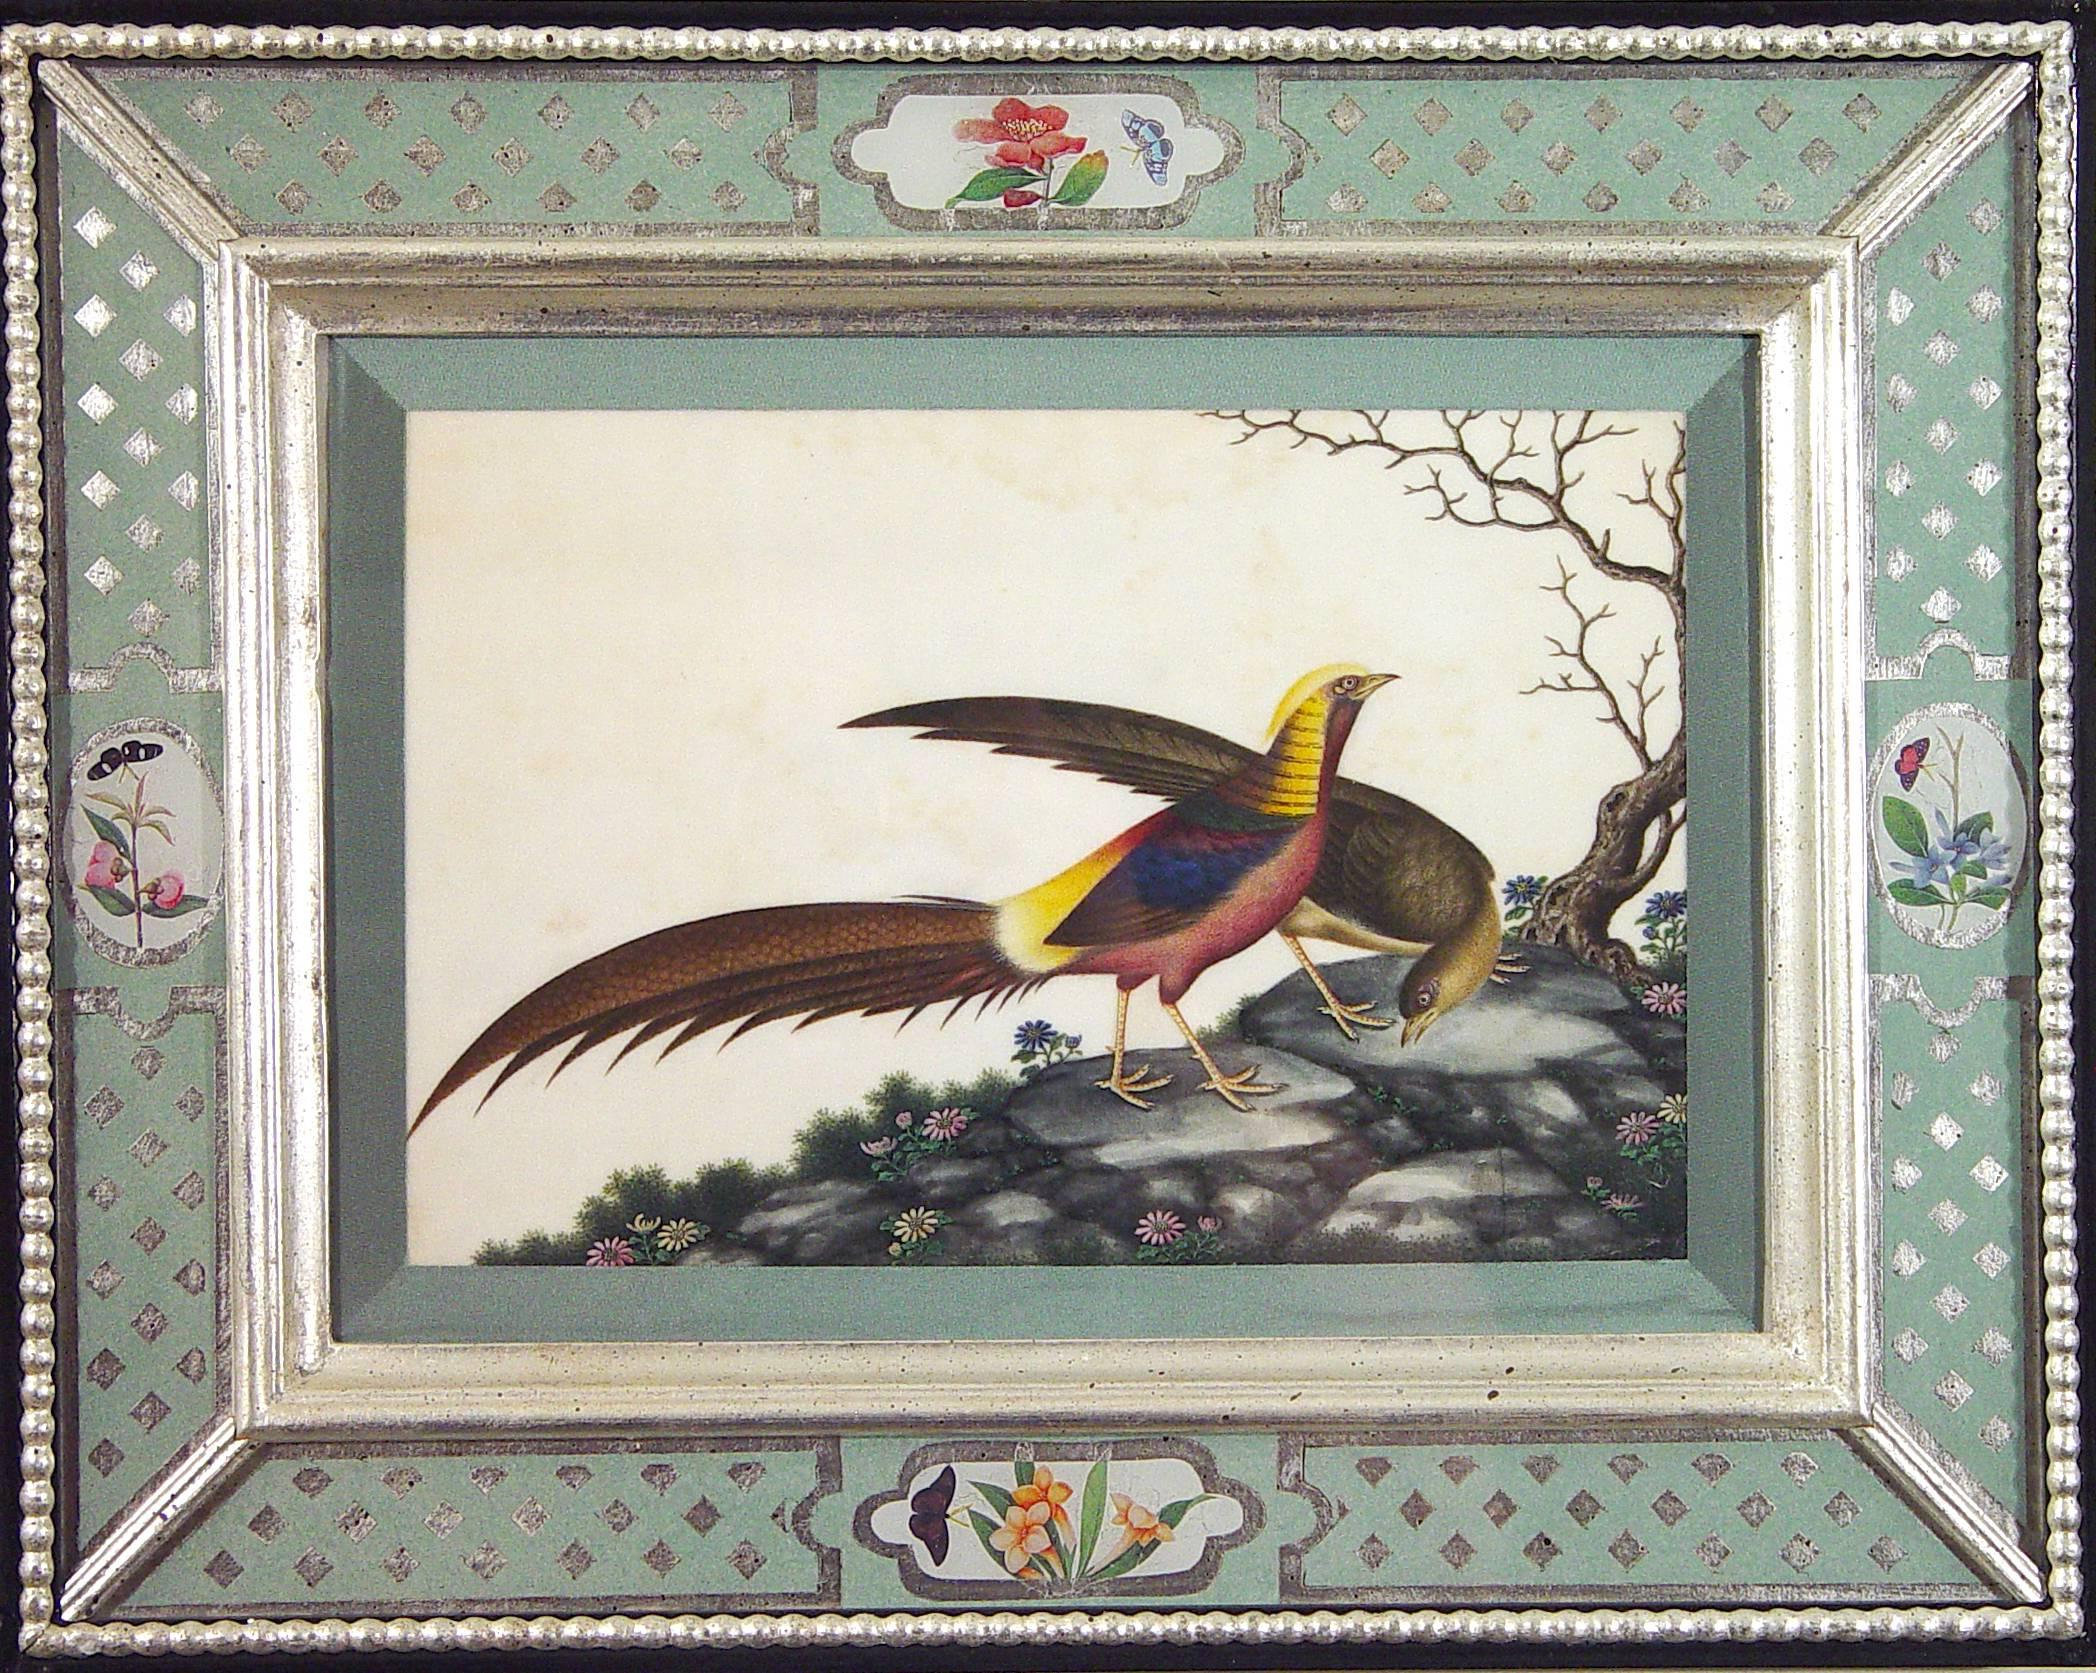 China trade watercolors of birds in églomisé frames,
Circa 1840.

The pair of China trade pith watercolors are within an églomisé and decoupage frame. 

Dimensions: 13½ inches x 17¼ inches wide.